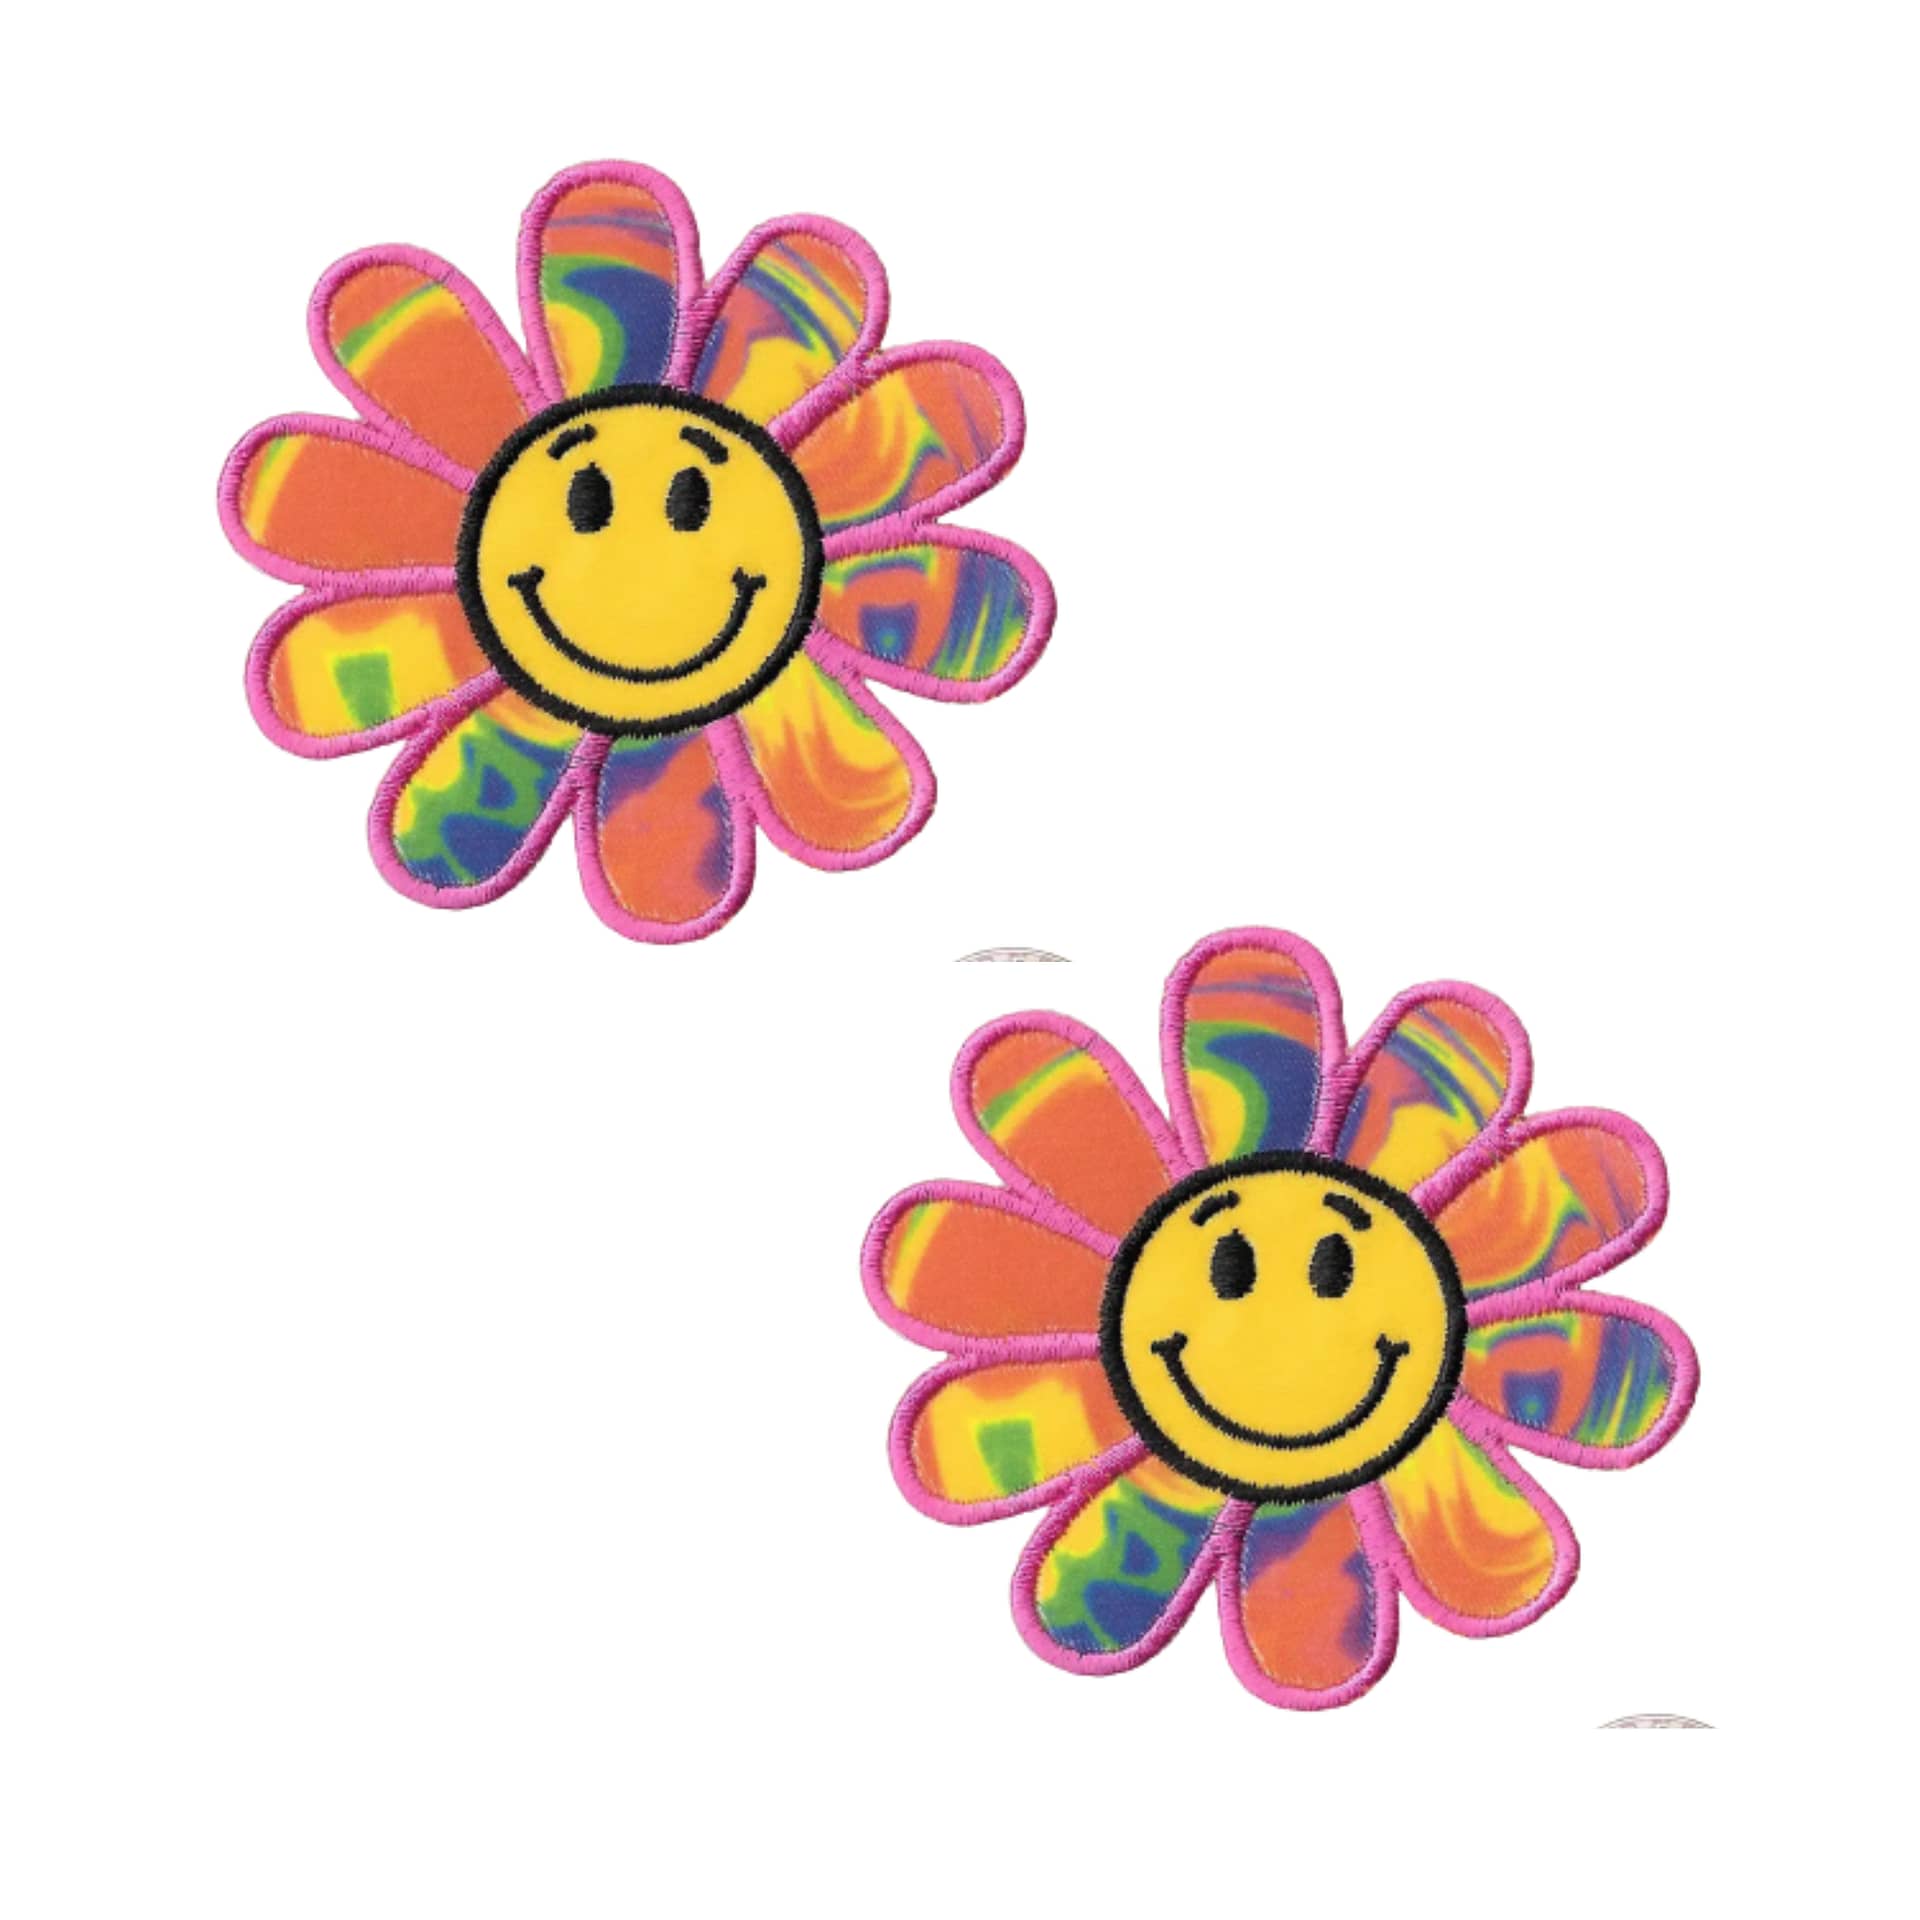 Happy Face Rainbow Daisy Embroidered Flower Patch Applique